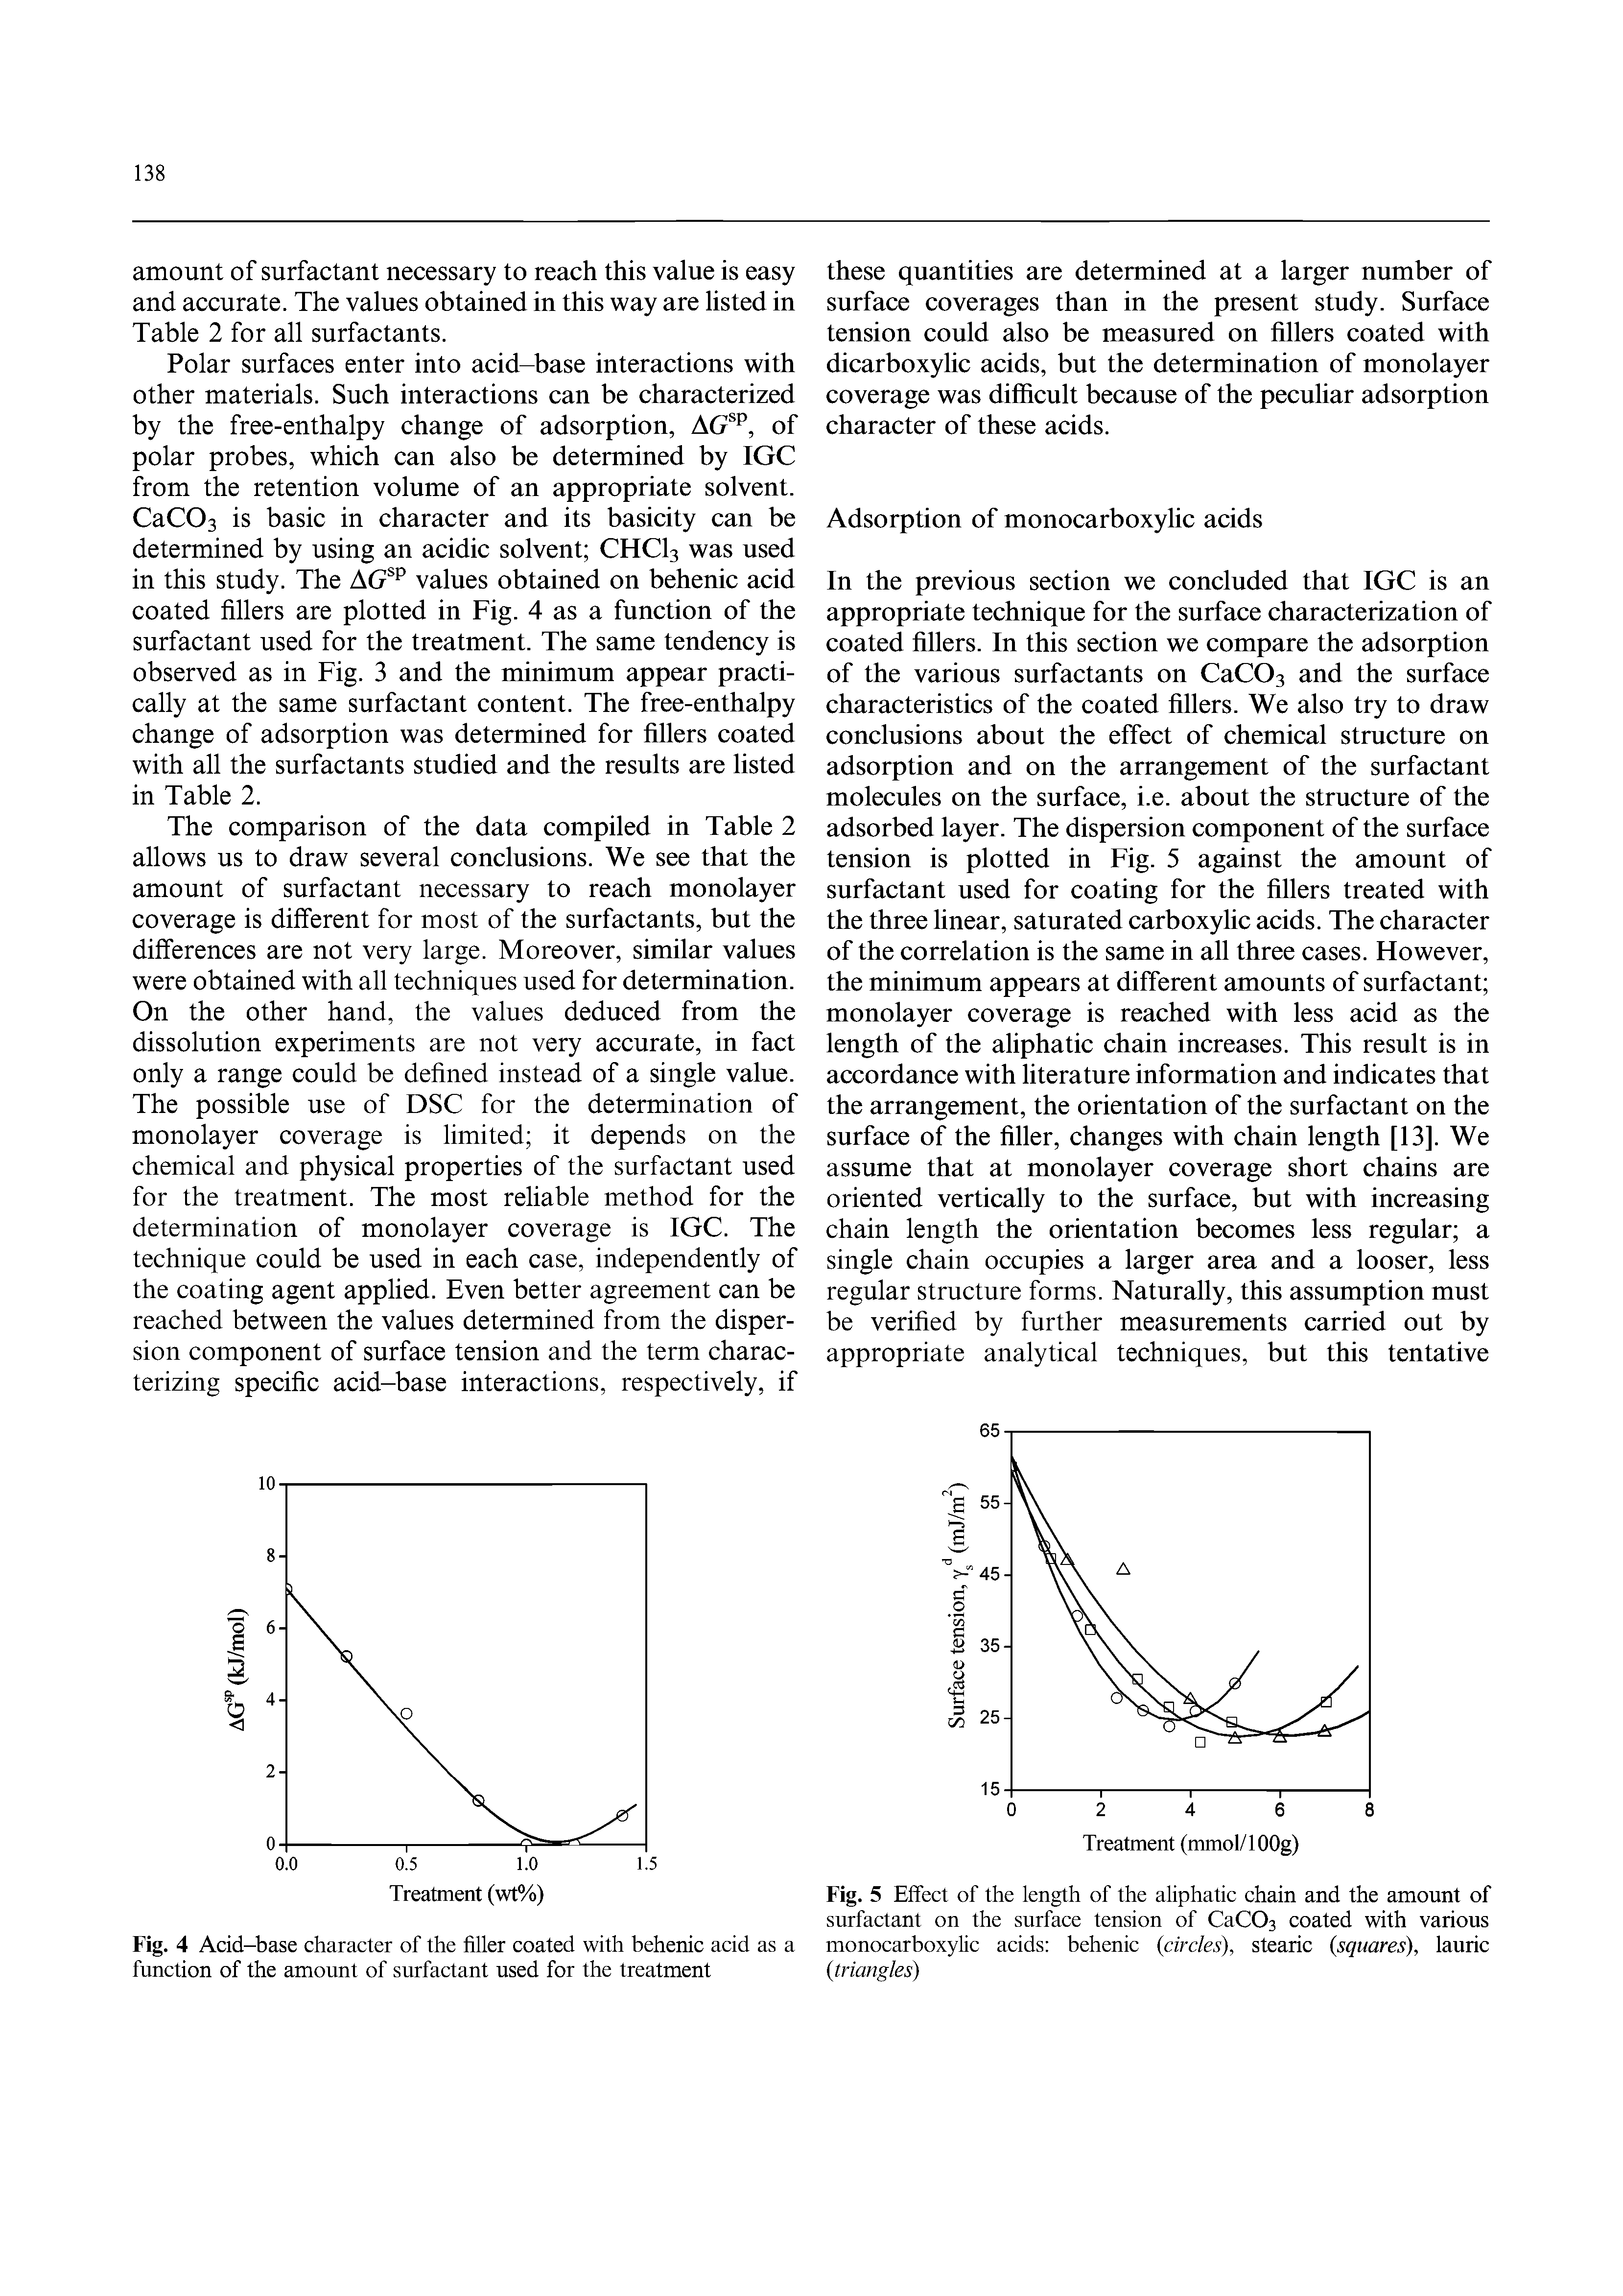 Fig. 5 Effect of the length of the aliphatic chain and the amount of surfactant on the surface tension of CaCOs coated with various monocarboxyhc acids behenic circles), stearic (squares), lauric (triangles)...